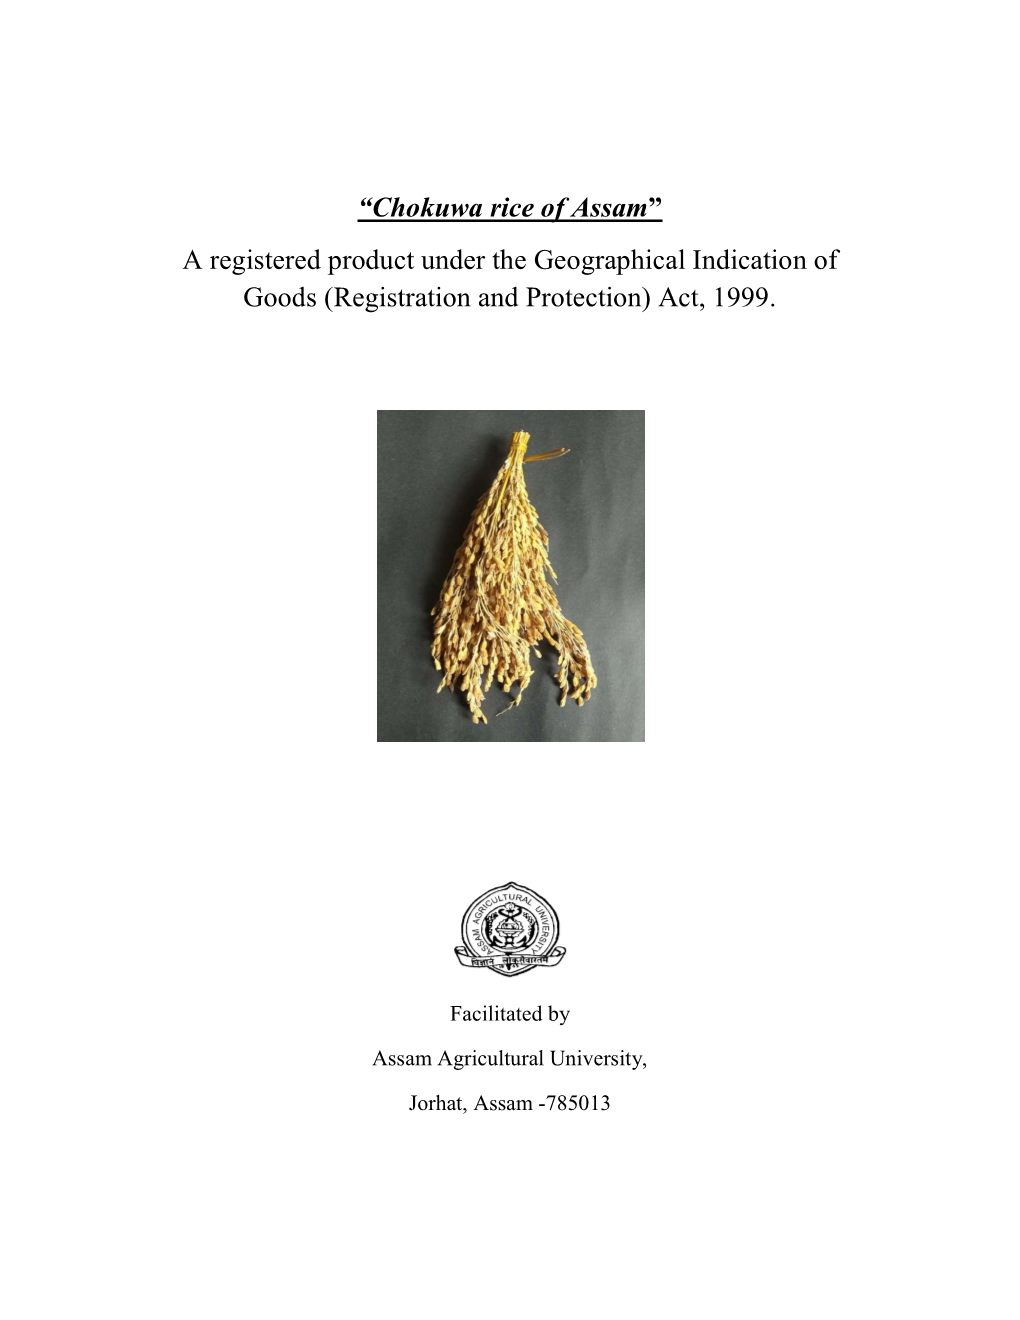 Chokuwa Rice of Assam” a Registered Product Under the Geographical Indication of Goods (Registration and Protection) Act, 1999